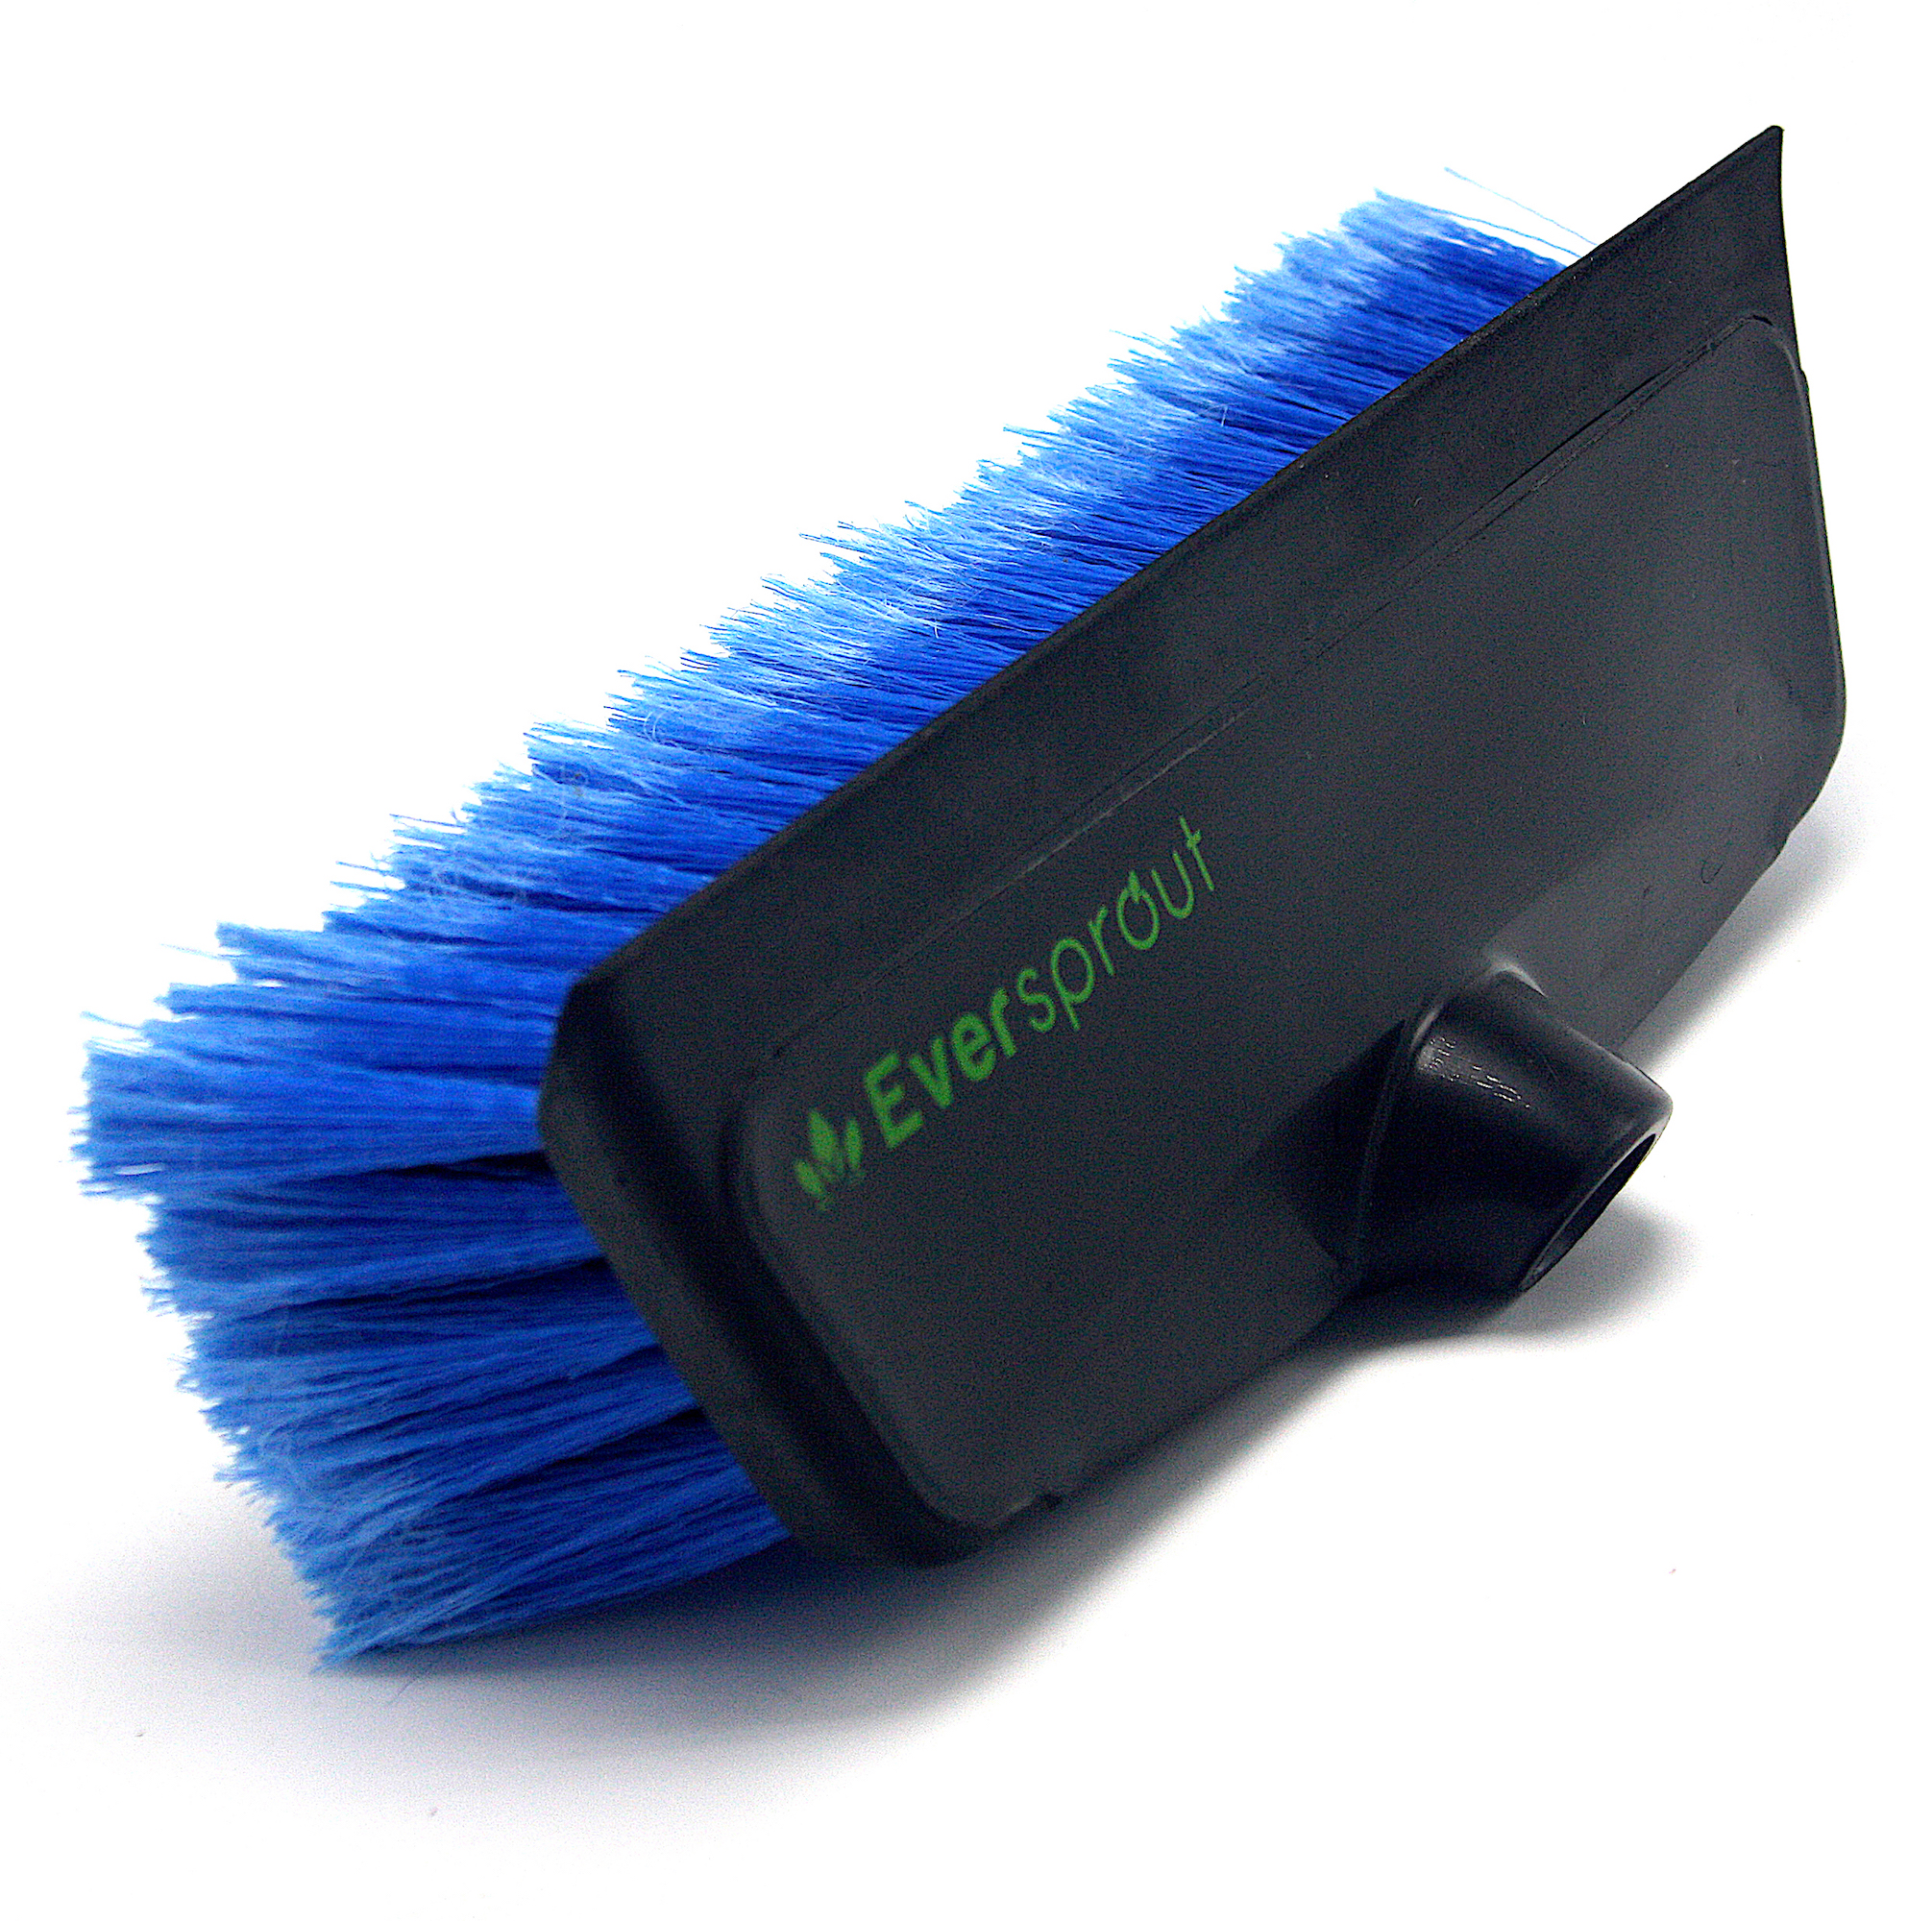 EVERSPROUT 11-inch Scrub Brush with Built-in Rubber Bumper 